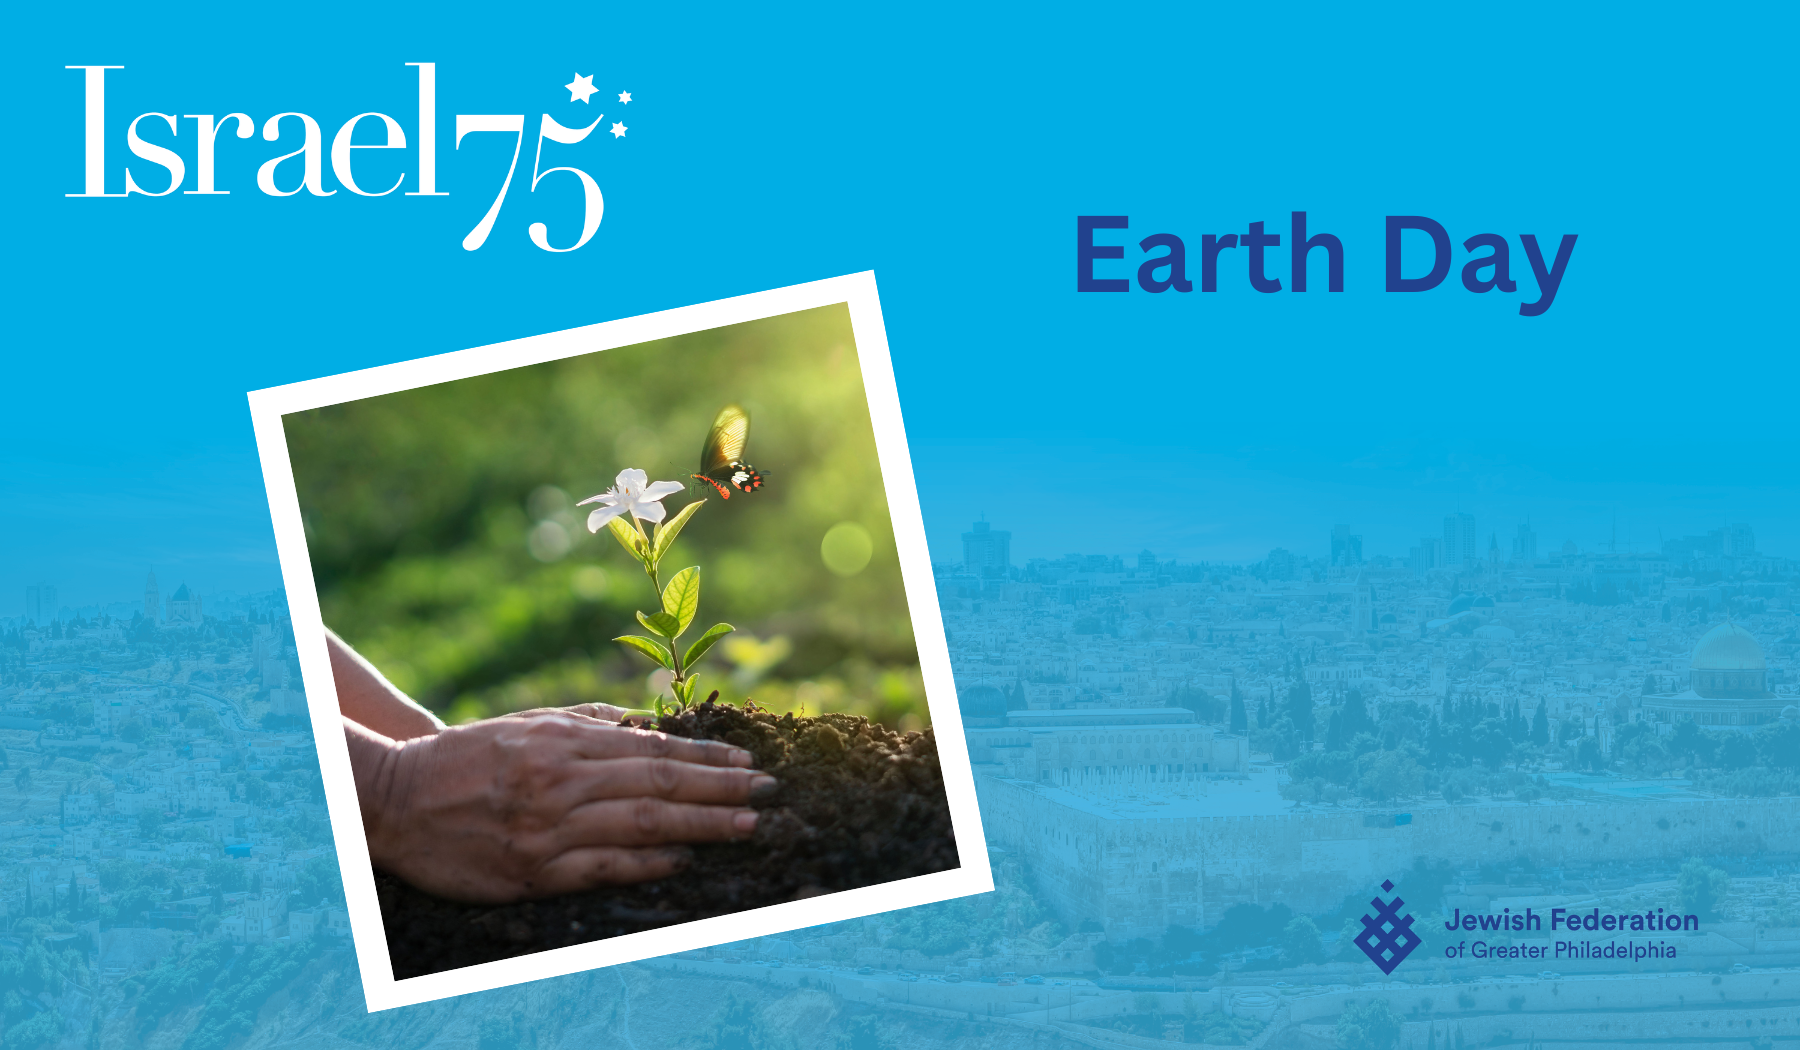 Sh’mirat Ha-Teva: Caring for Nature this Earth Day